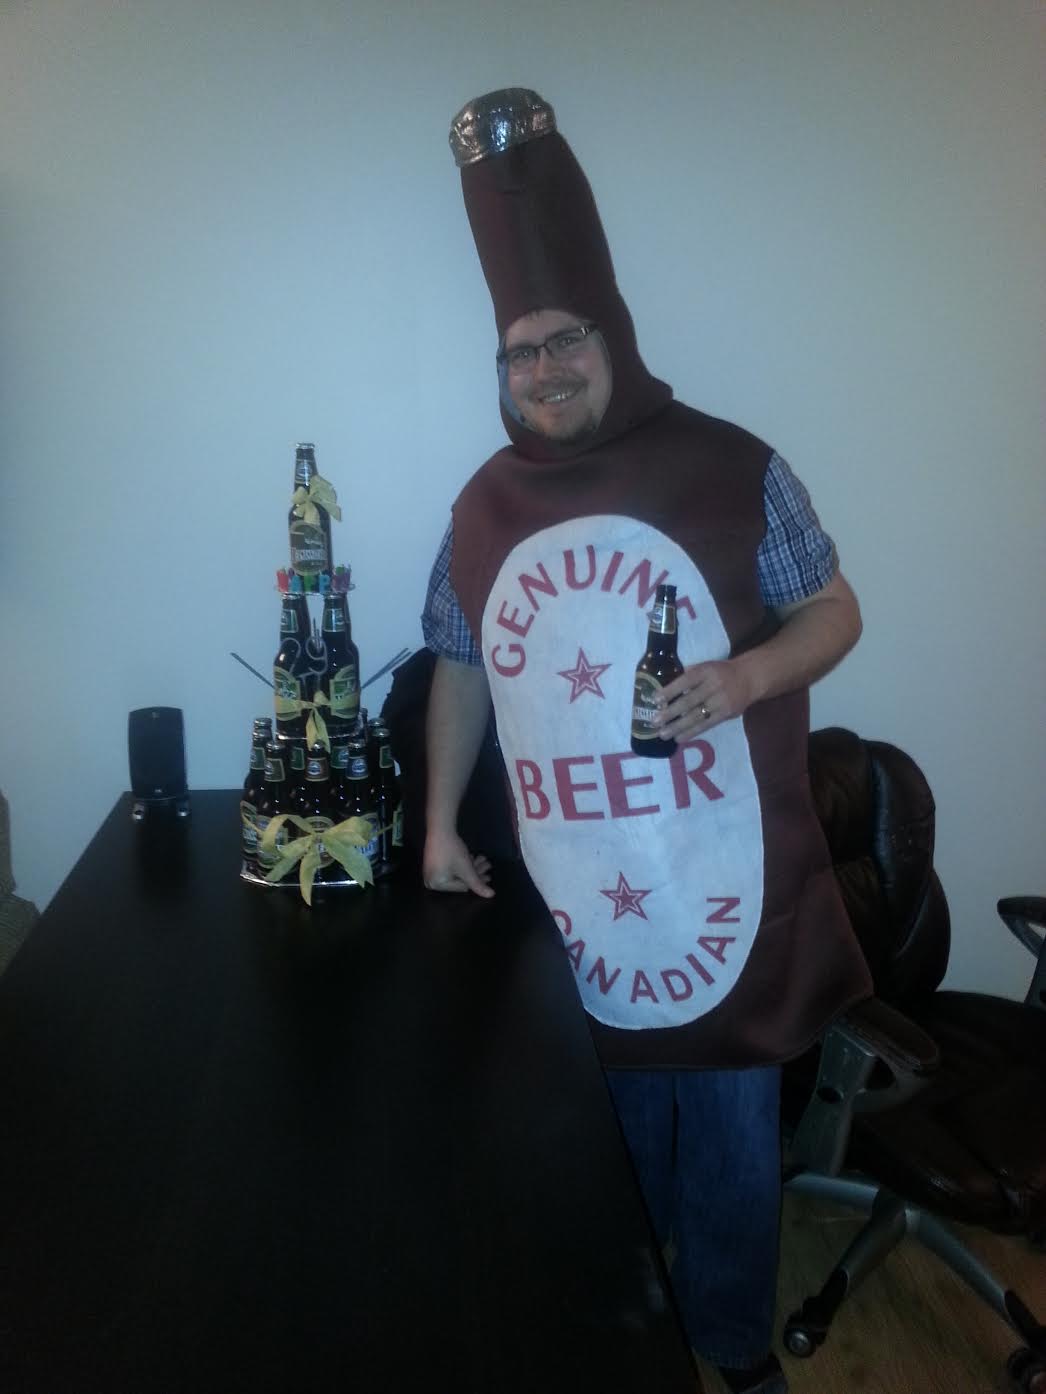 For my 29th birthday, we had beer themed party and my friends made me a beer cake and made me dress up as a beer.